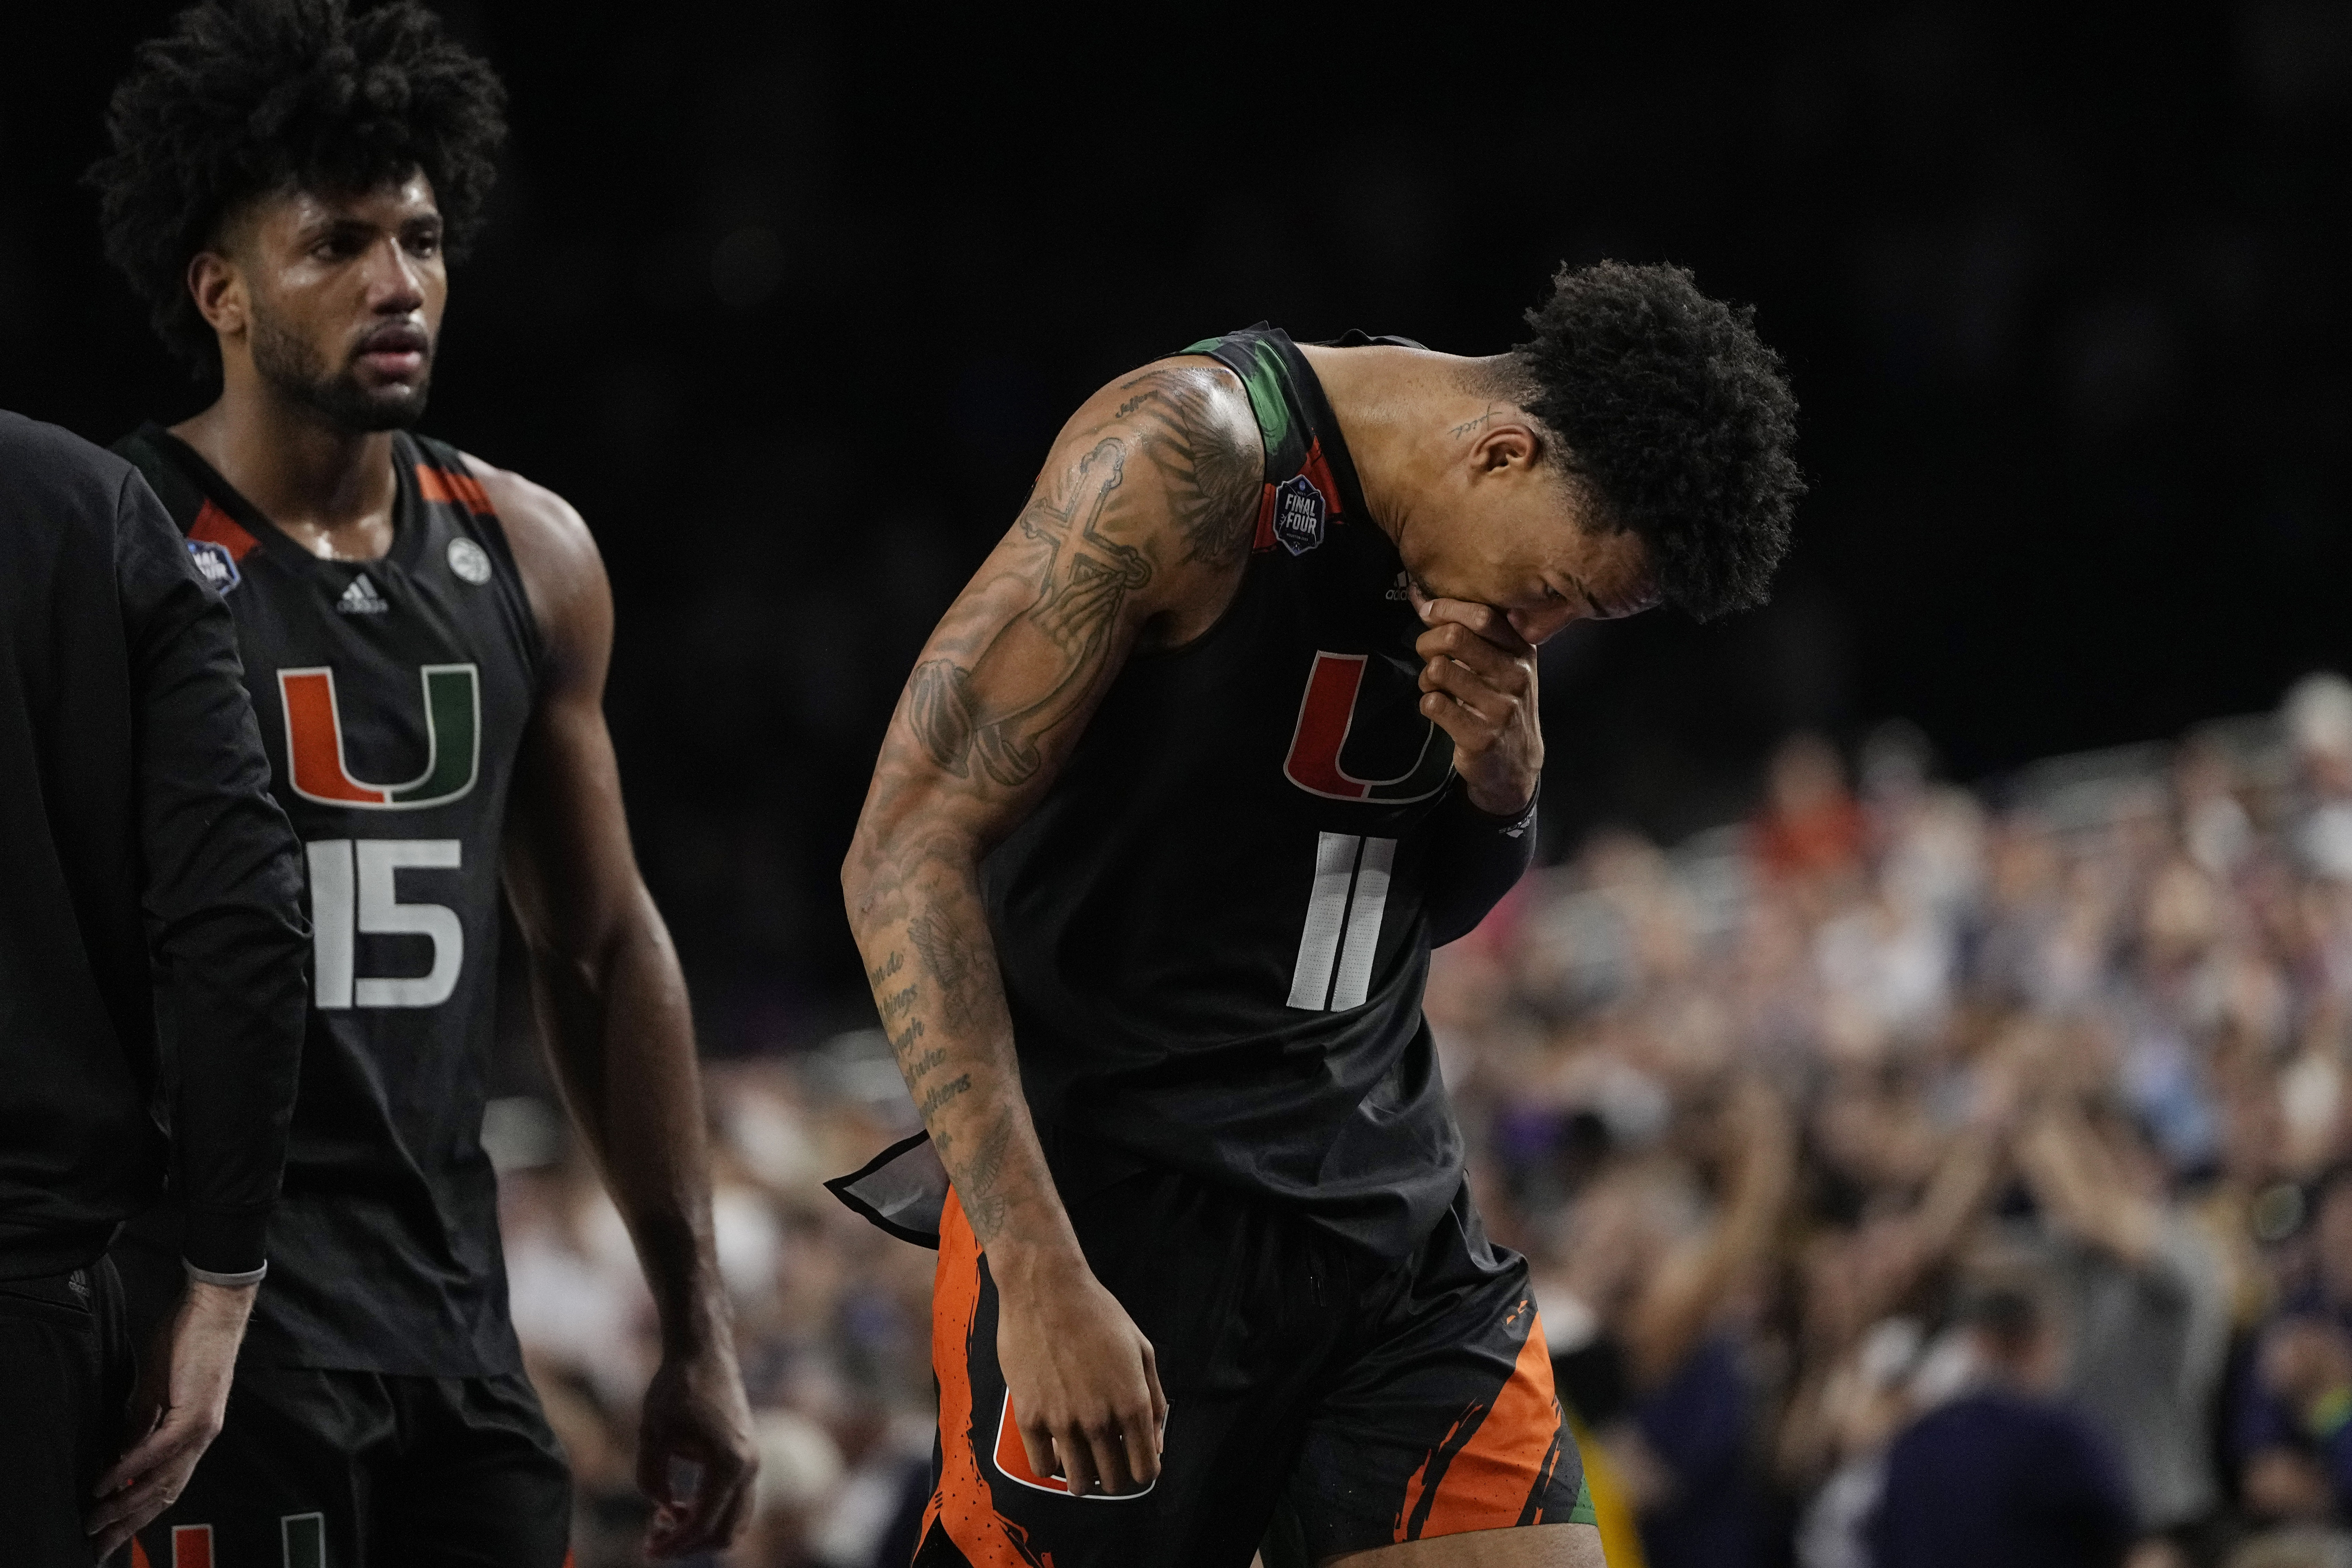 Final Four: Miami Hurricanes among those surprised by FAU basketball run